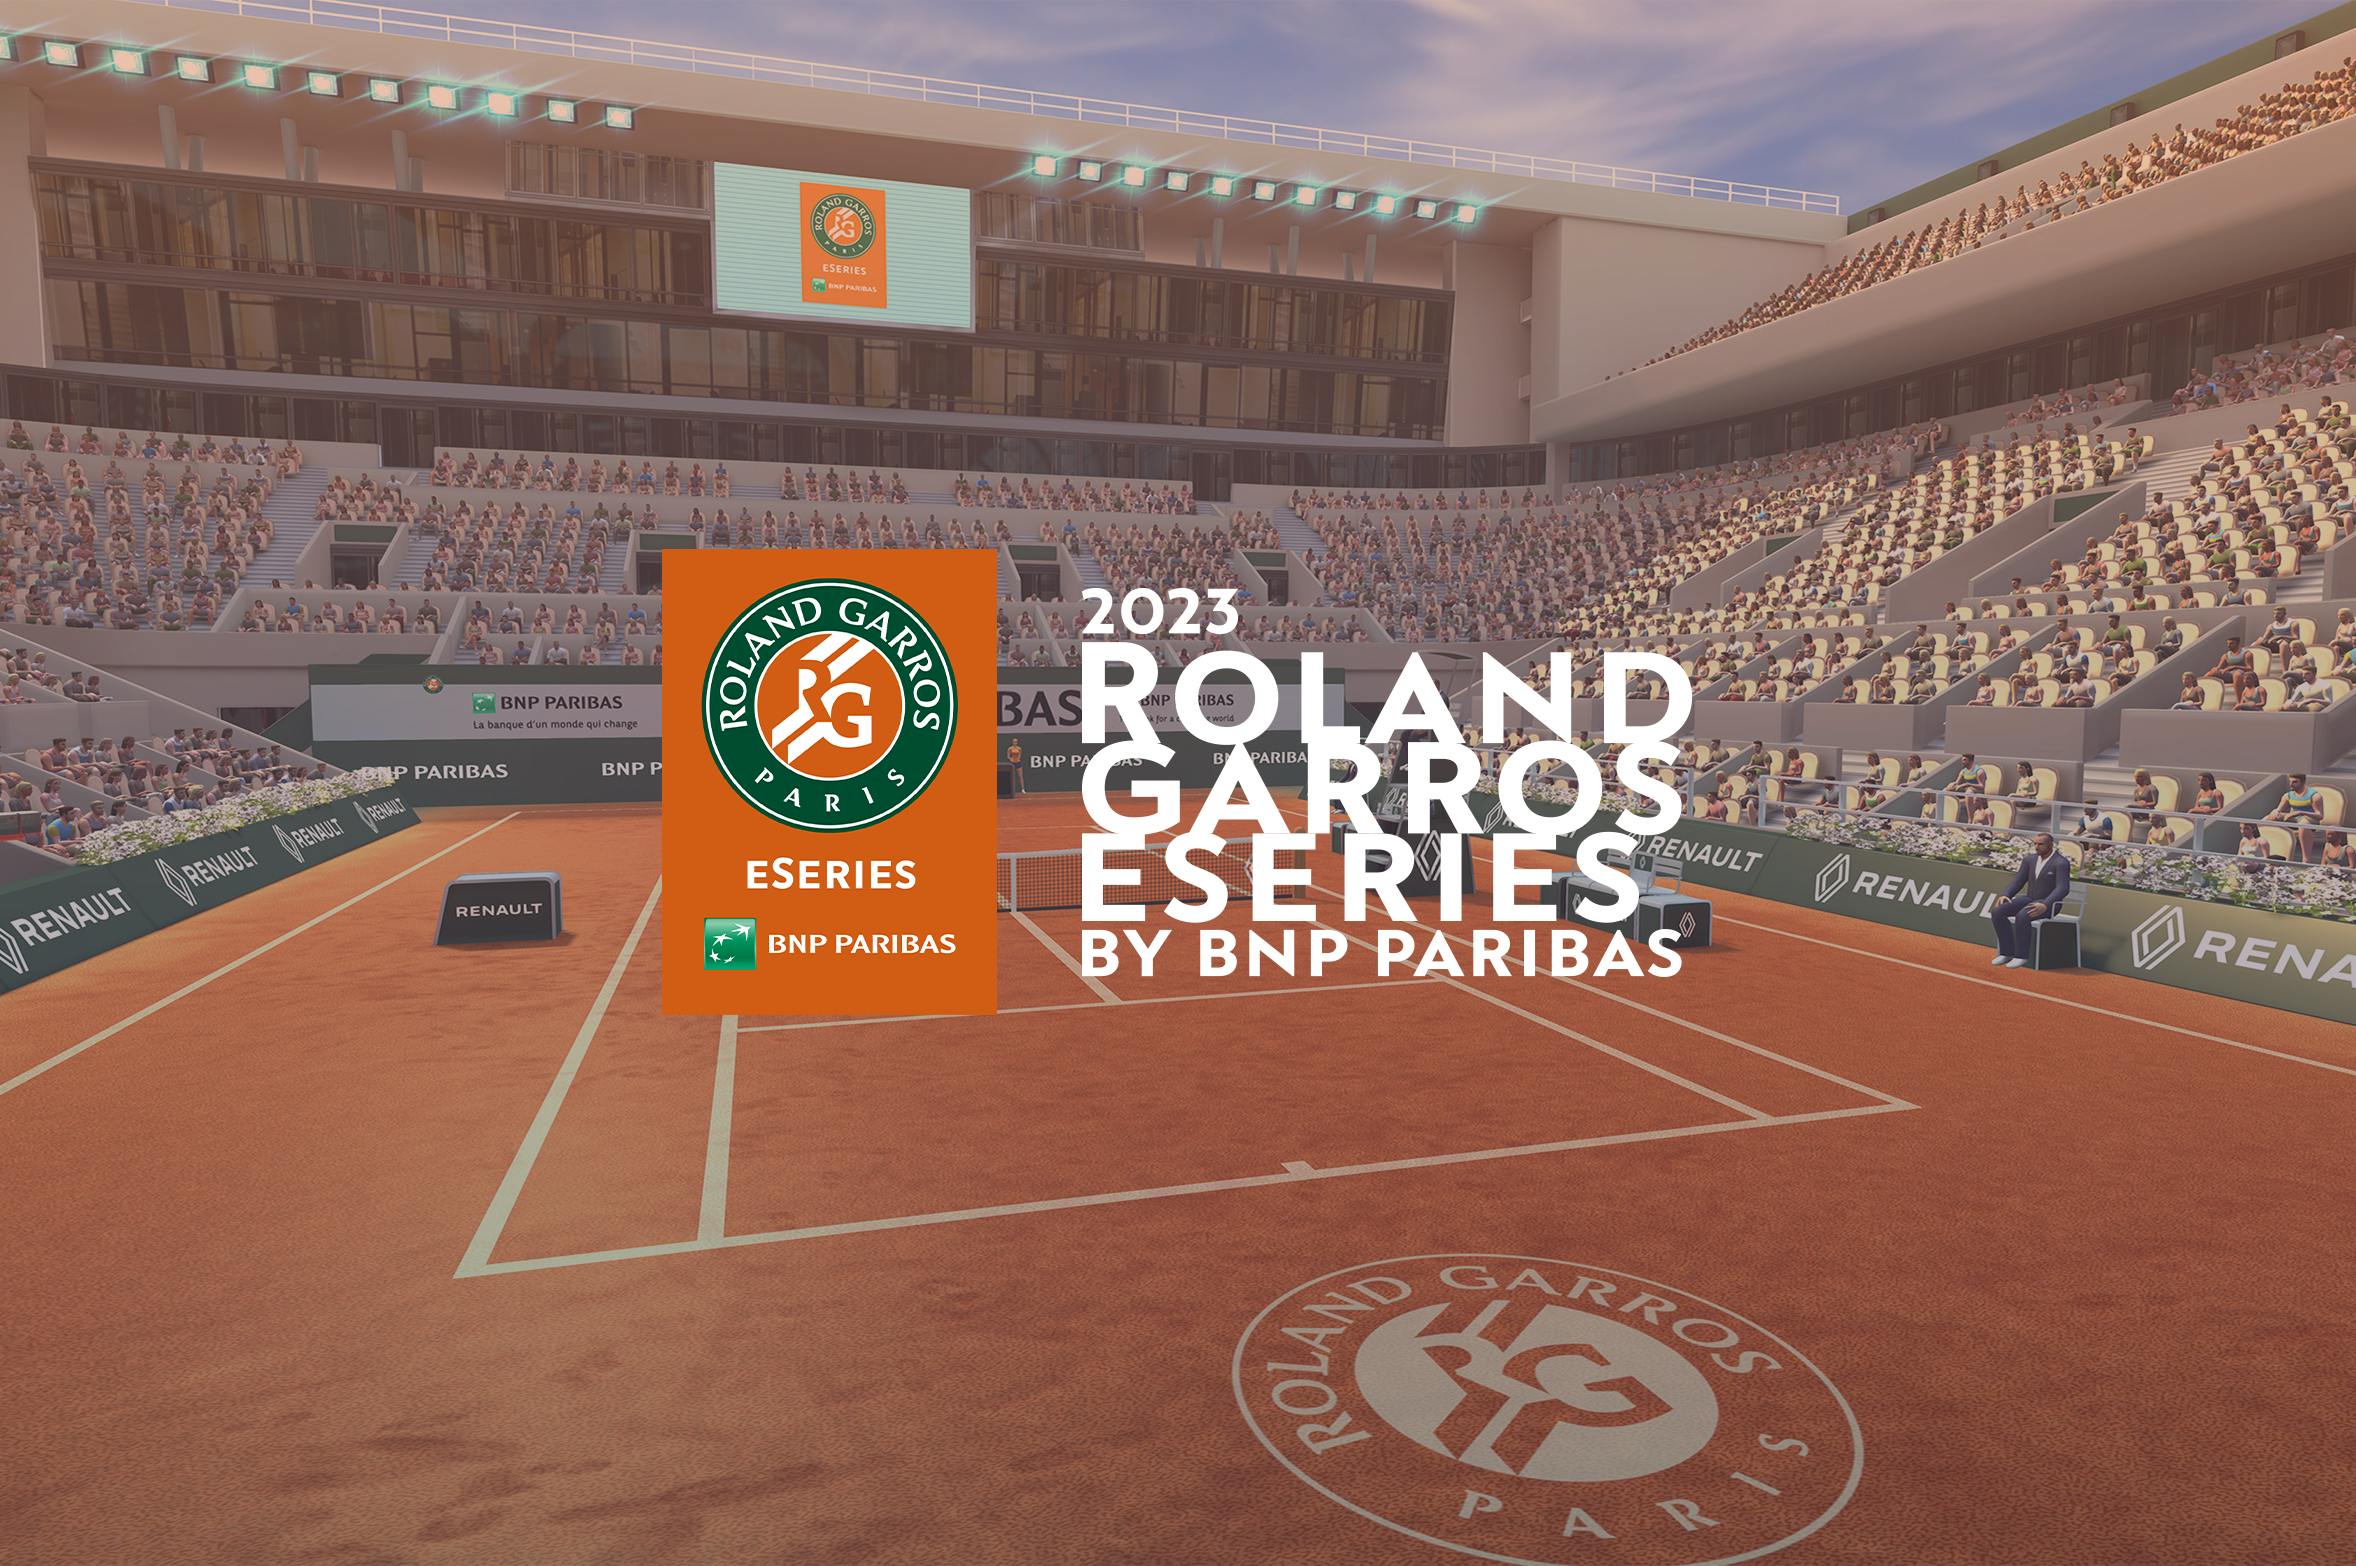 RolandGarros eSeries by BNP Paribas kickoff for the 2023 edition